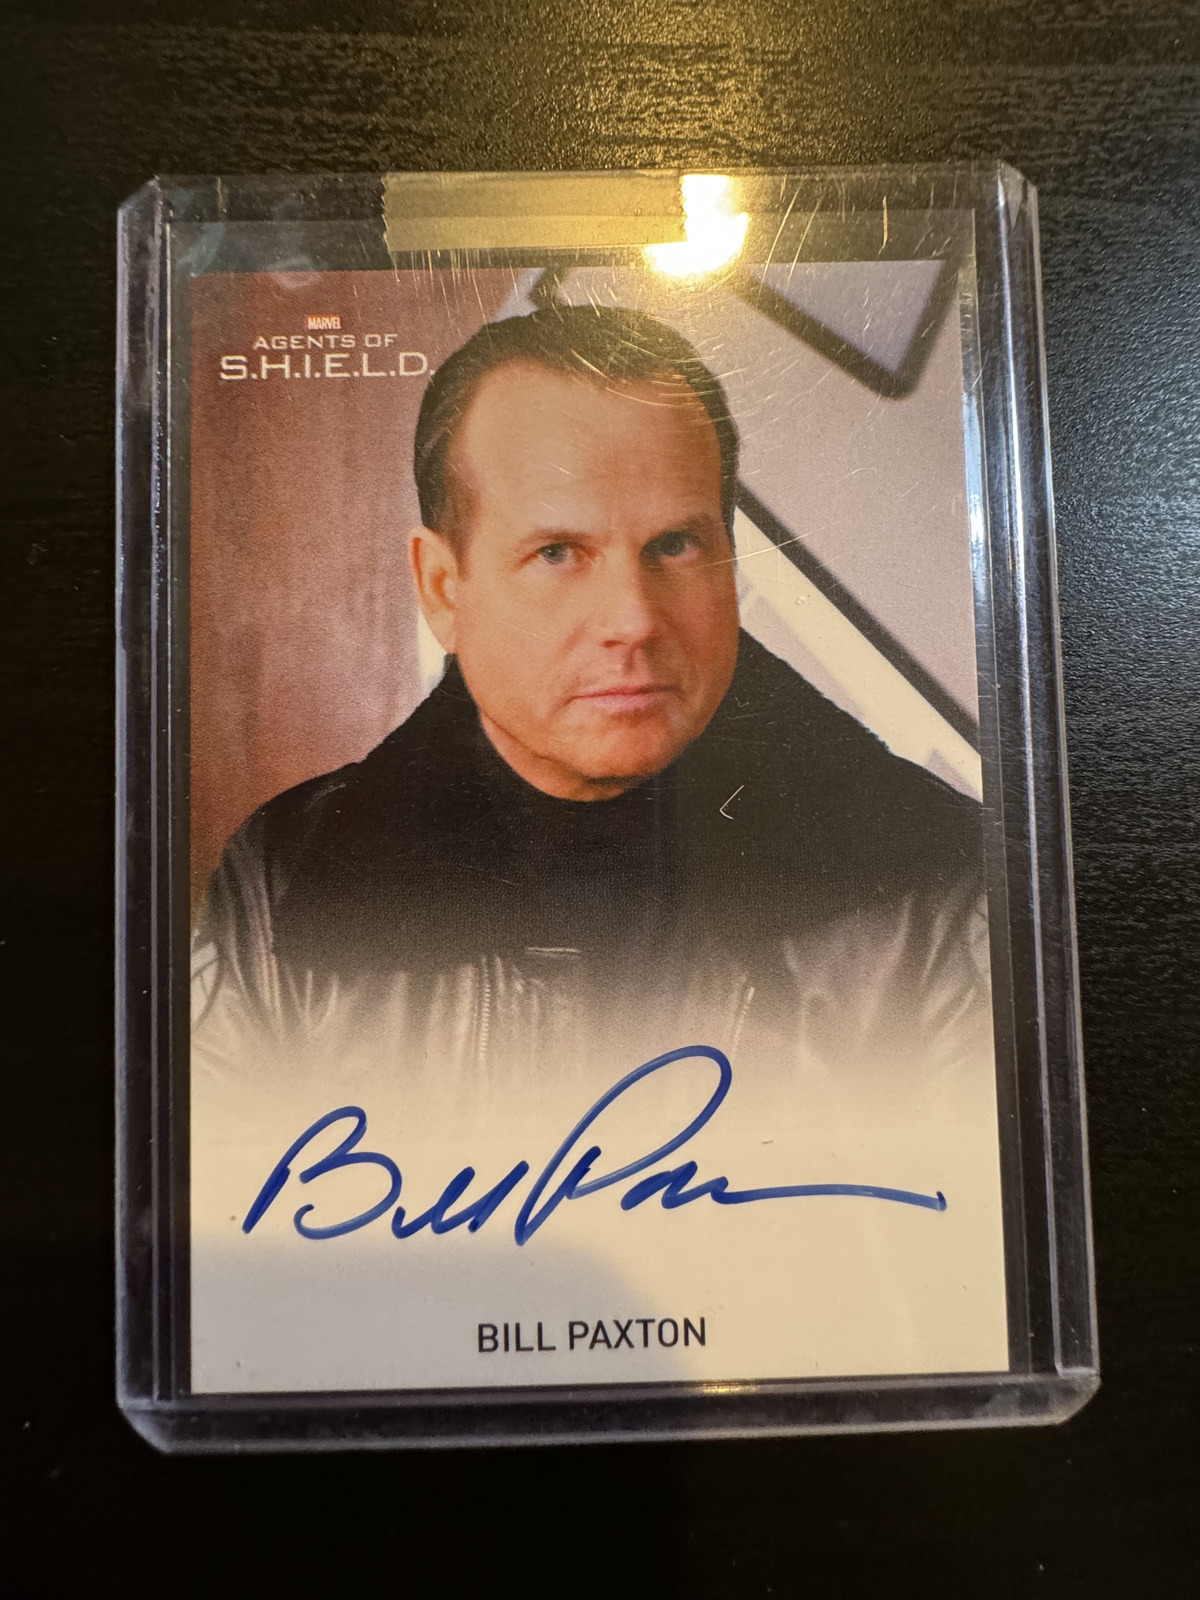 2015 Marvel Agents of Shield Bill Paxton Autograph Auto Card